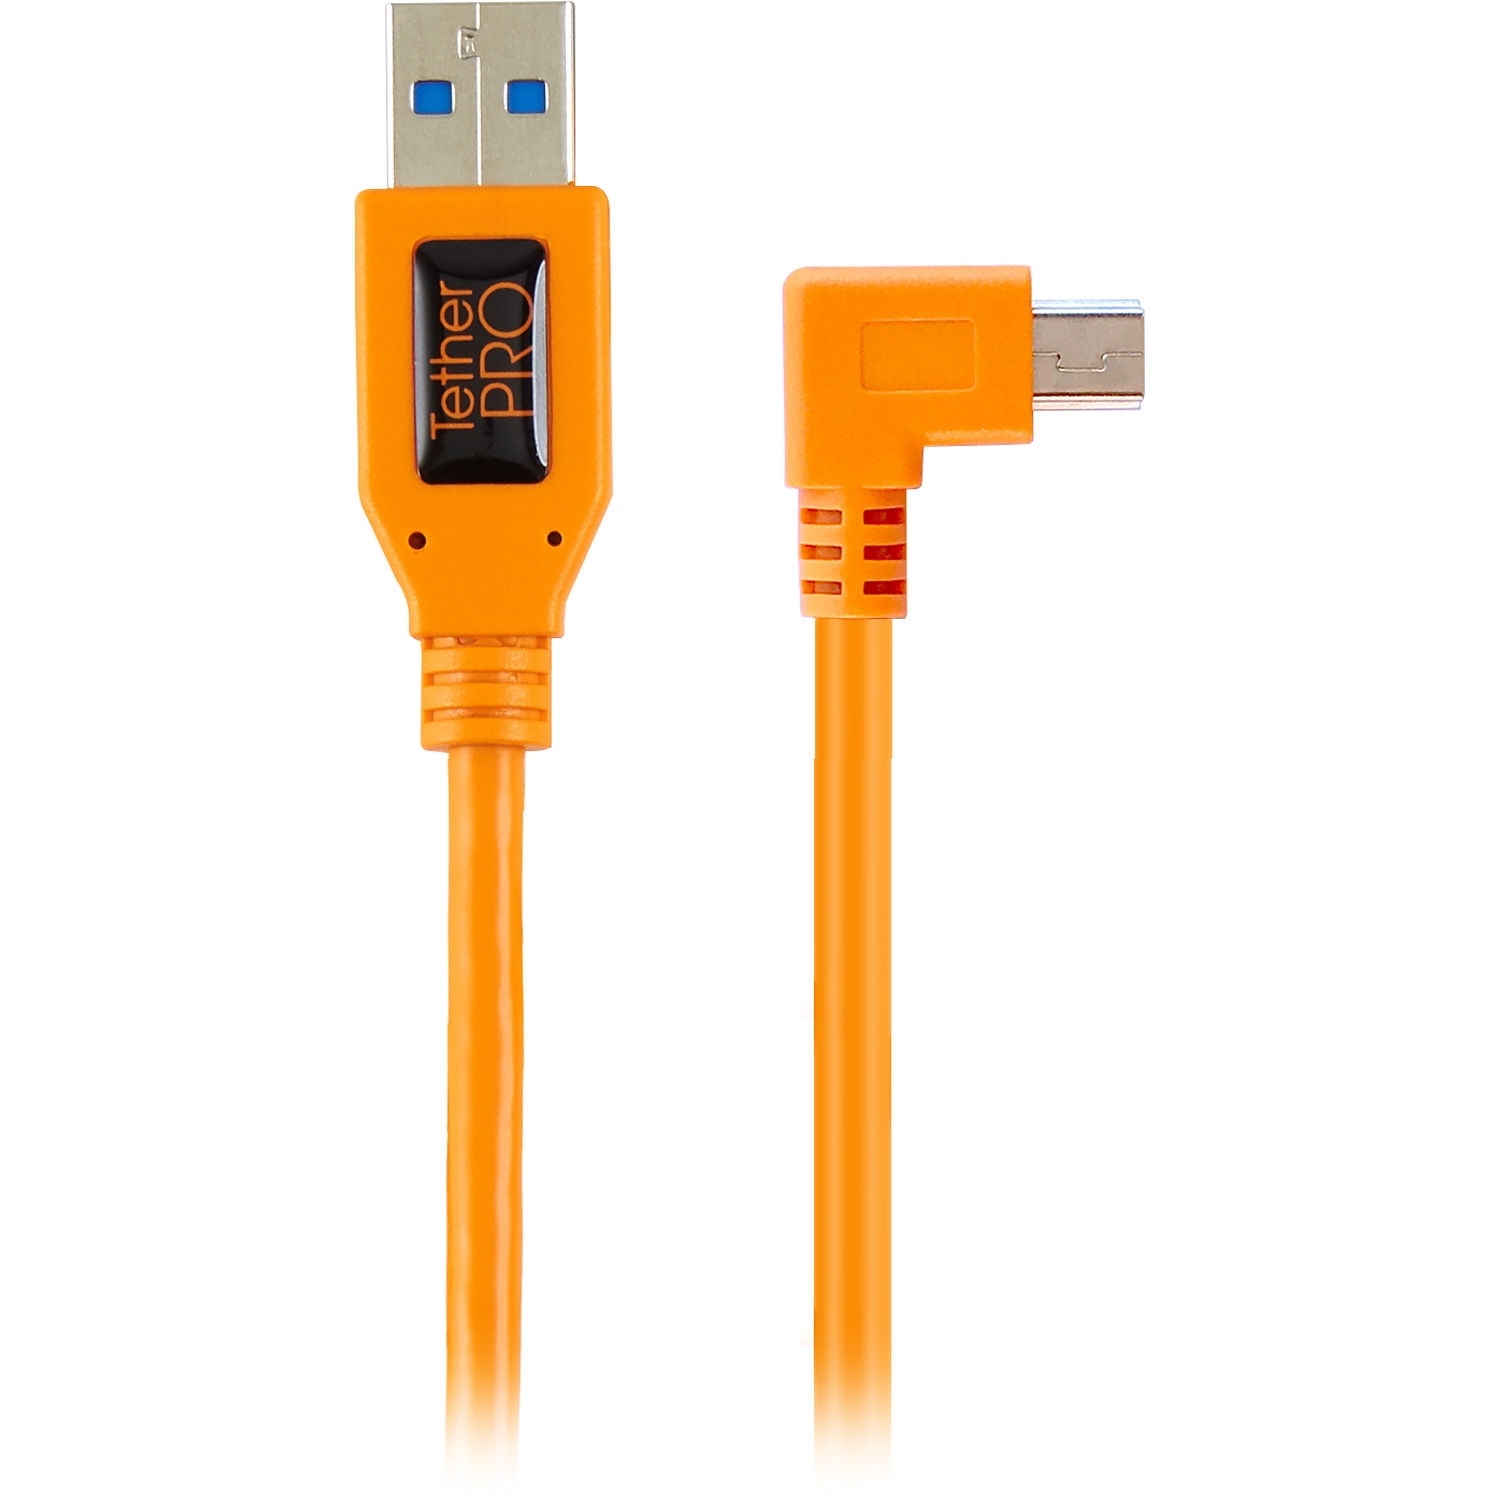 Tether Tools TetherPro USB 2.0 Type-A to 5-Pin Mini-USB Right Angle Adapter Cable (Orange, 50cm)